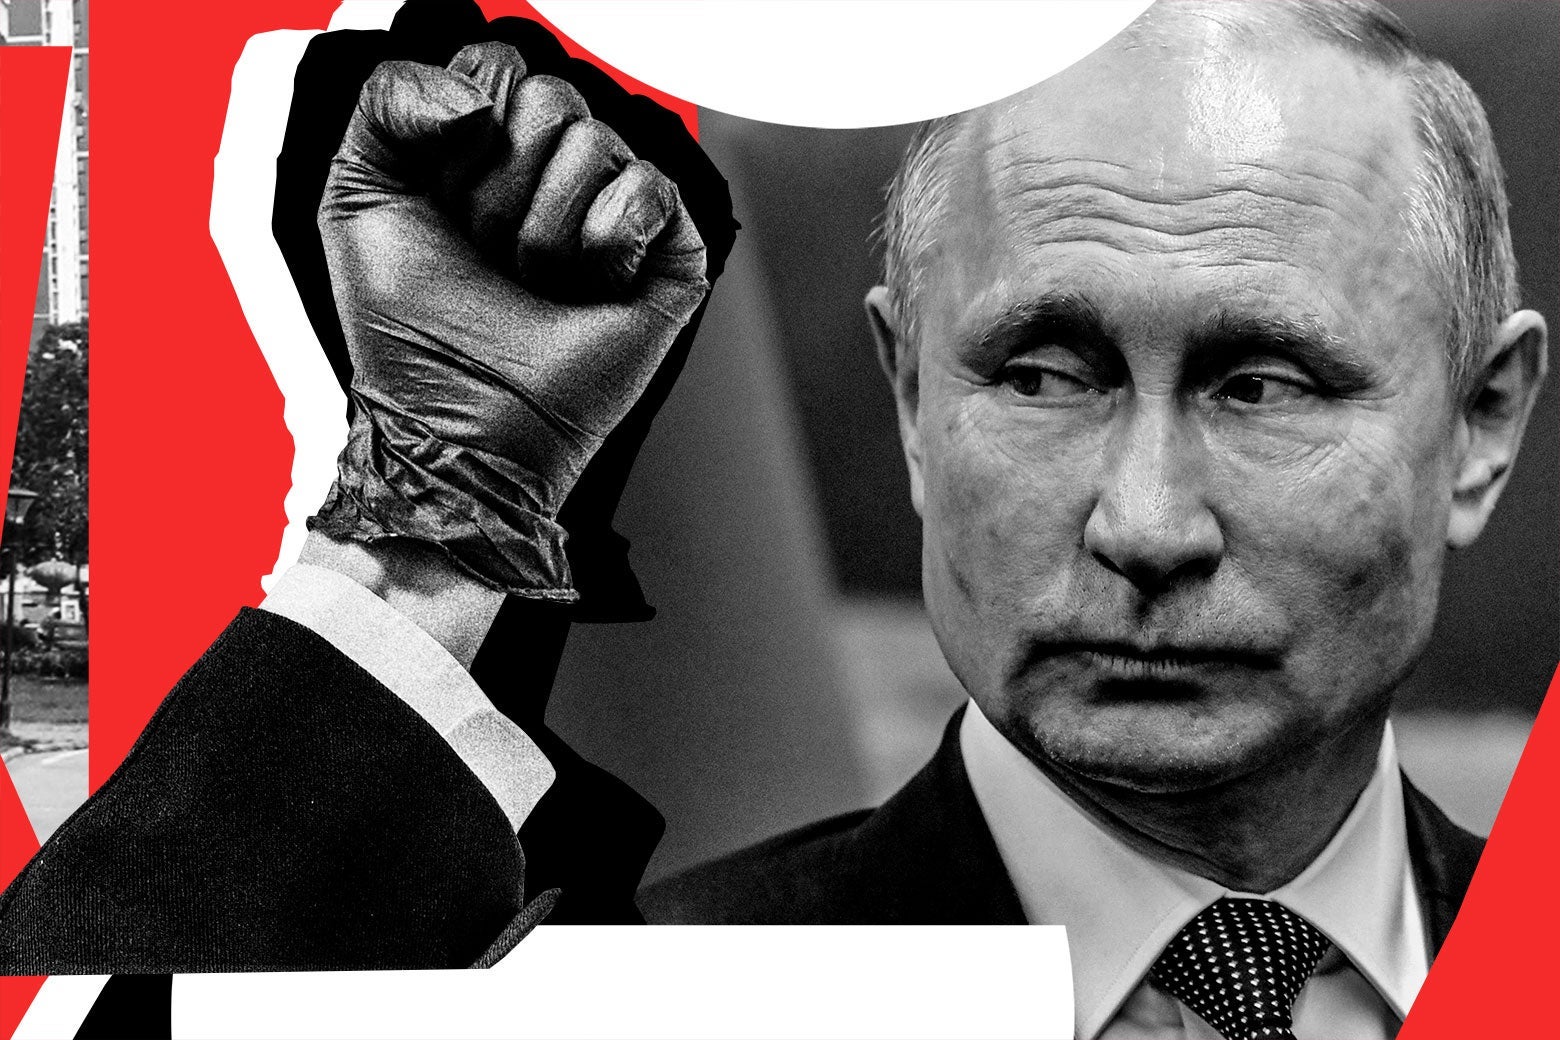 Photo collage of Vladimir Putin and a gloved fist.